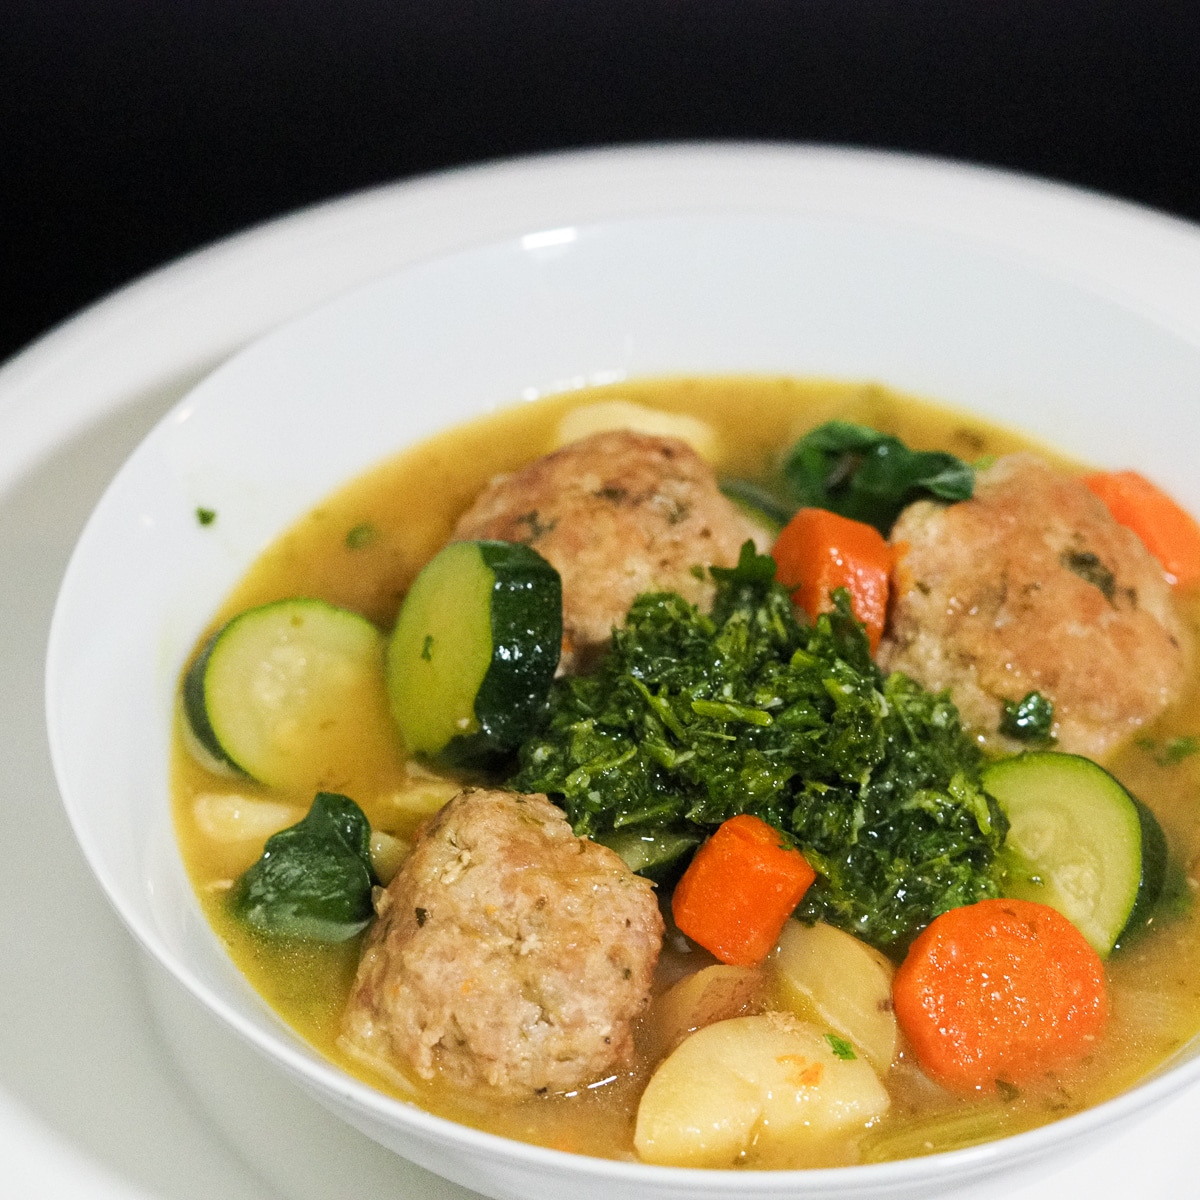 Meatballs. chopped carrots, potatoes, zucchini with broth in a white bowl topped with green pesto